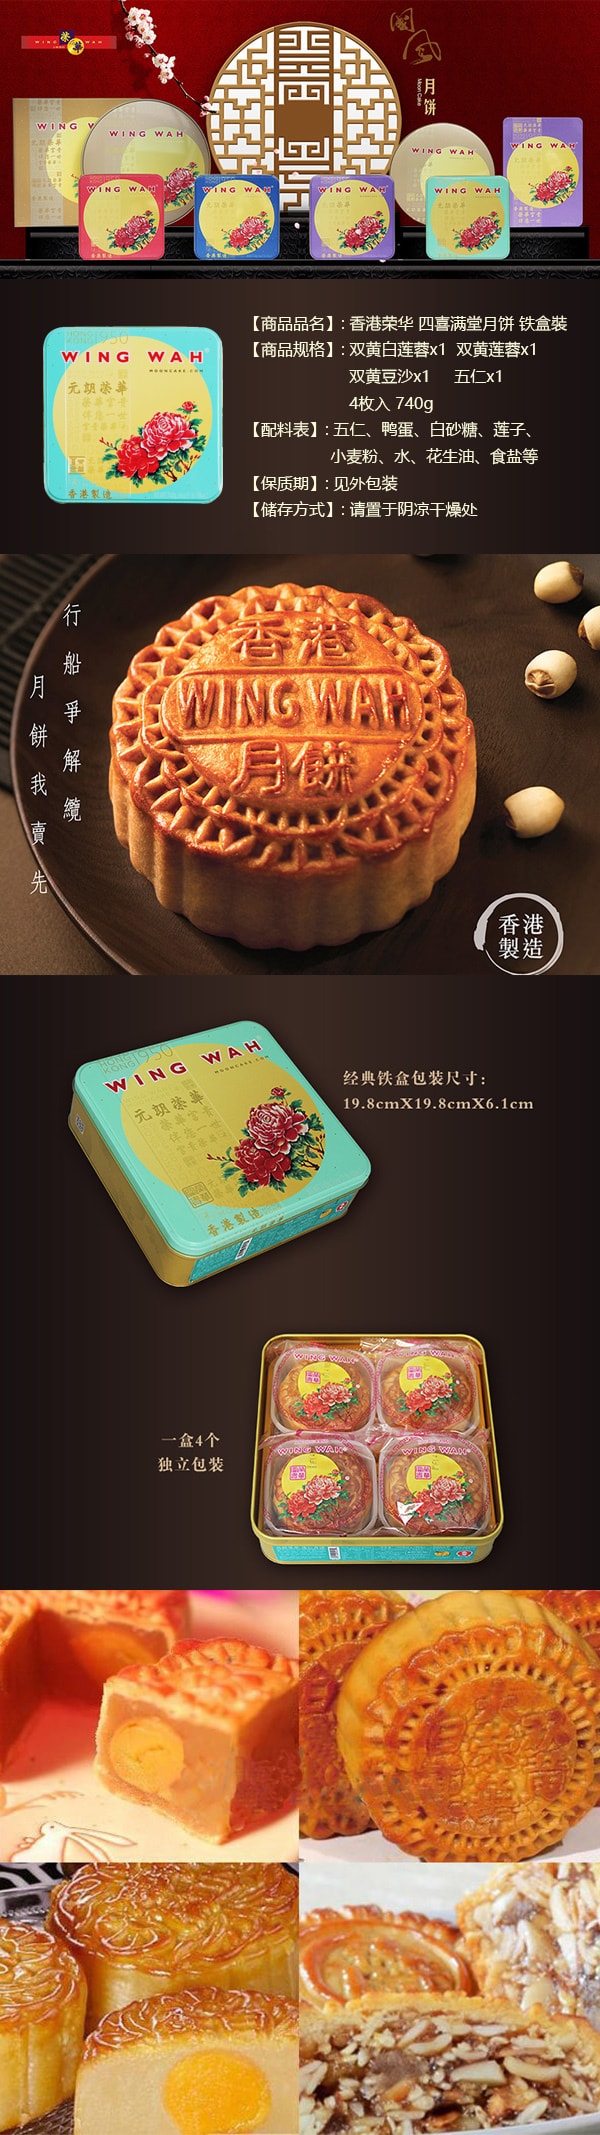 Assorted Mooncake 4 Pieces Gift Box 740g 【Delivery Date: End of August】